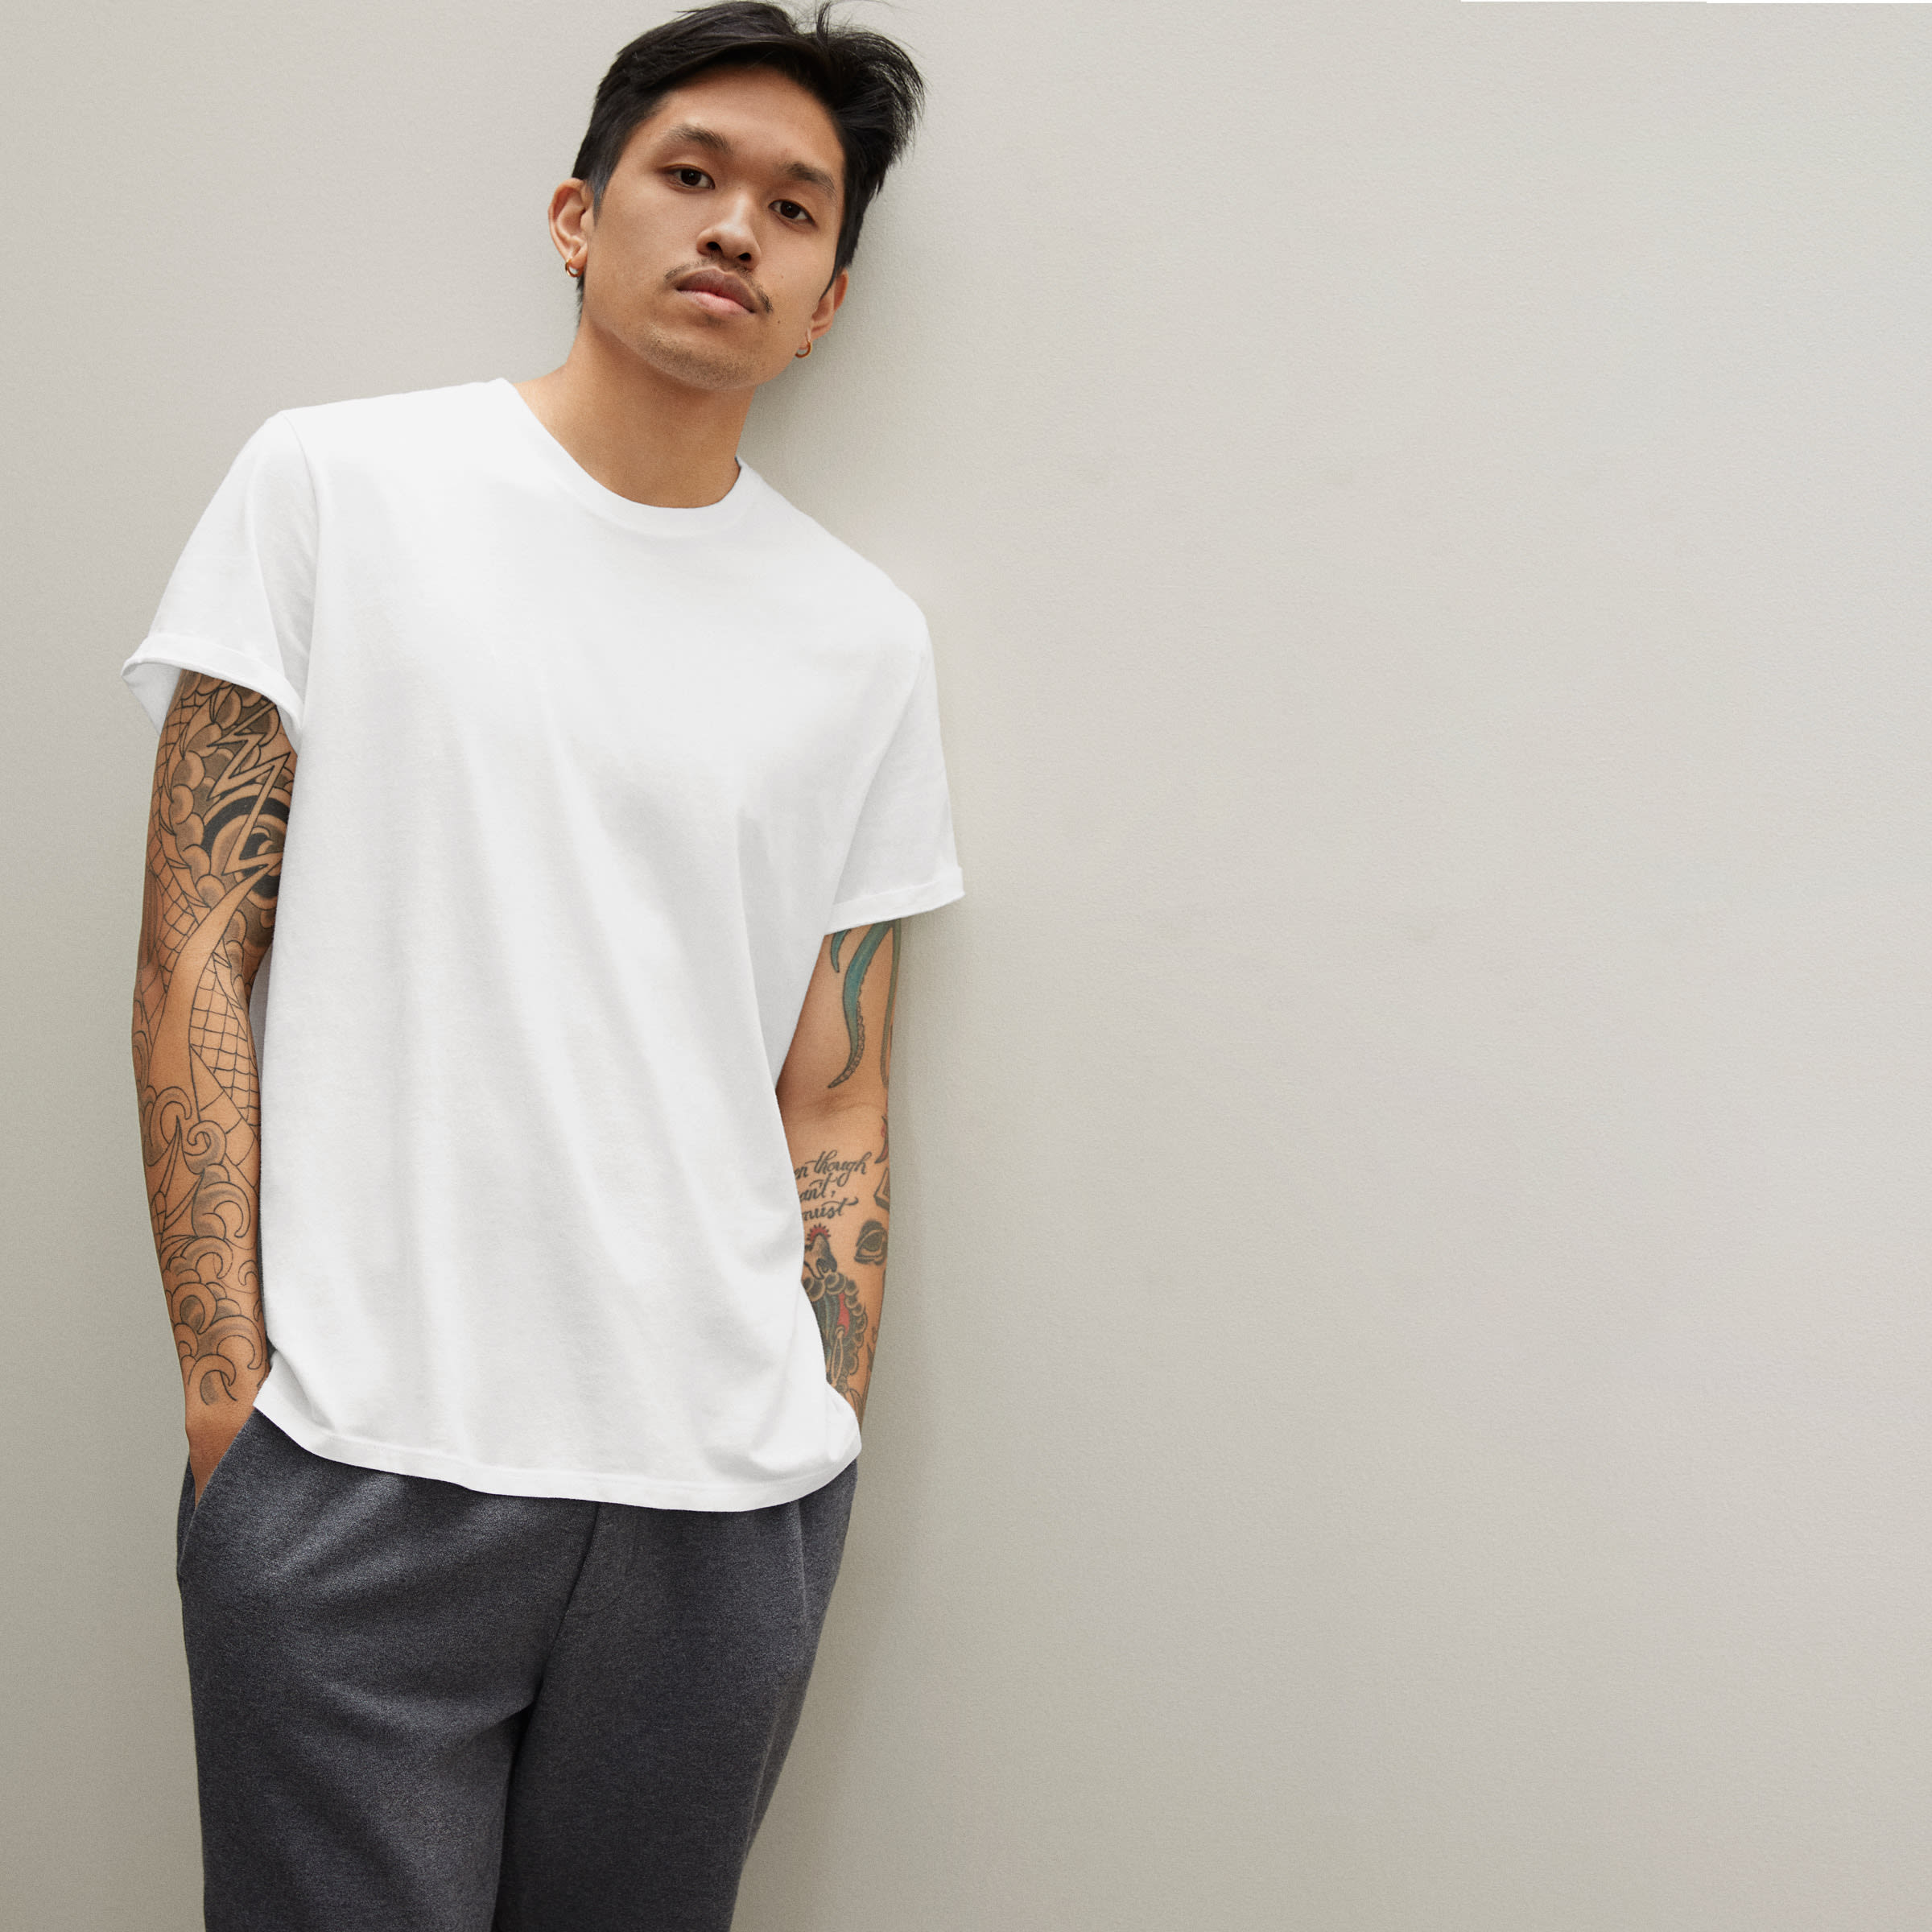 The 13 Best Men's White T-Shirts According to Men